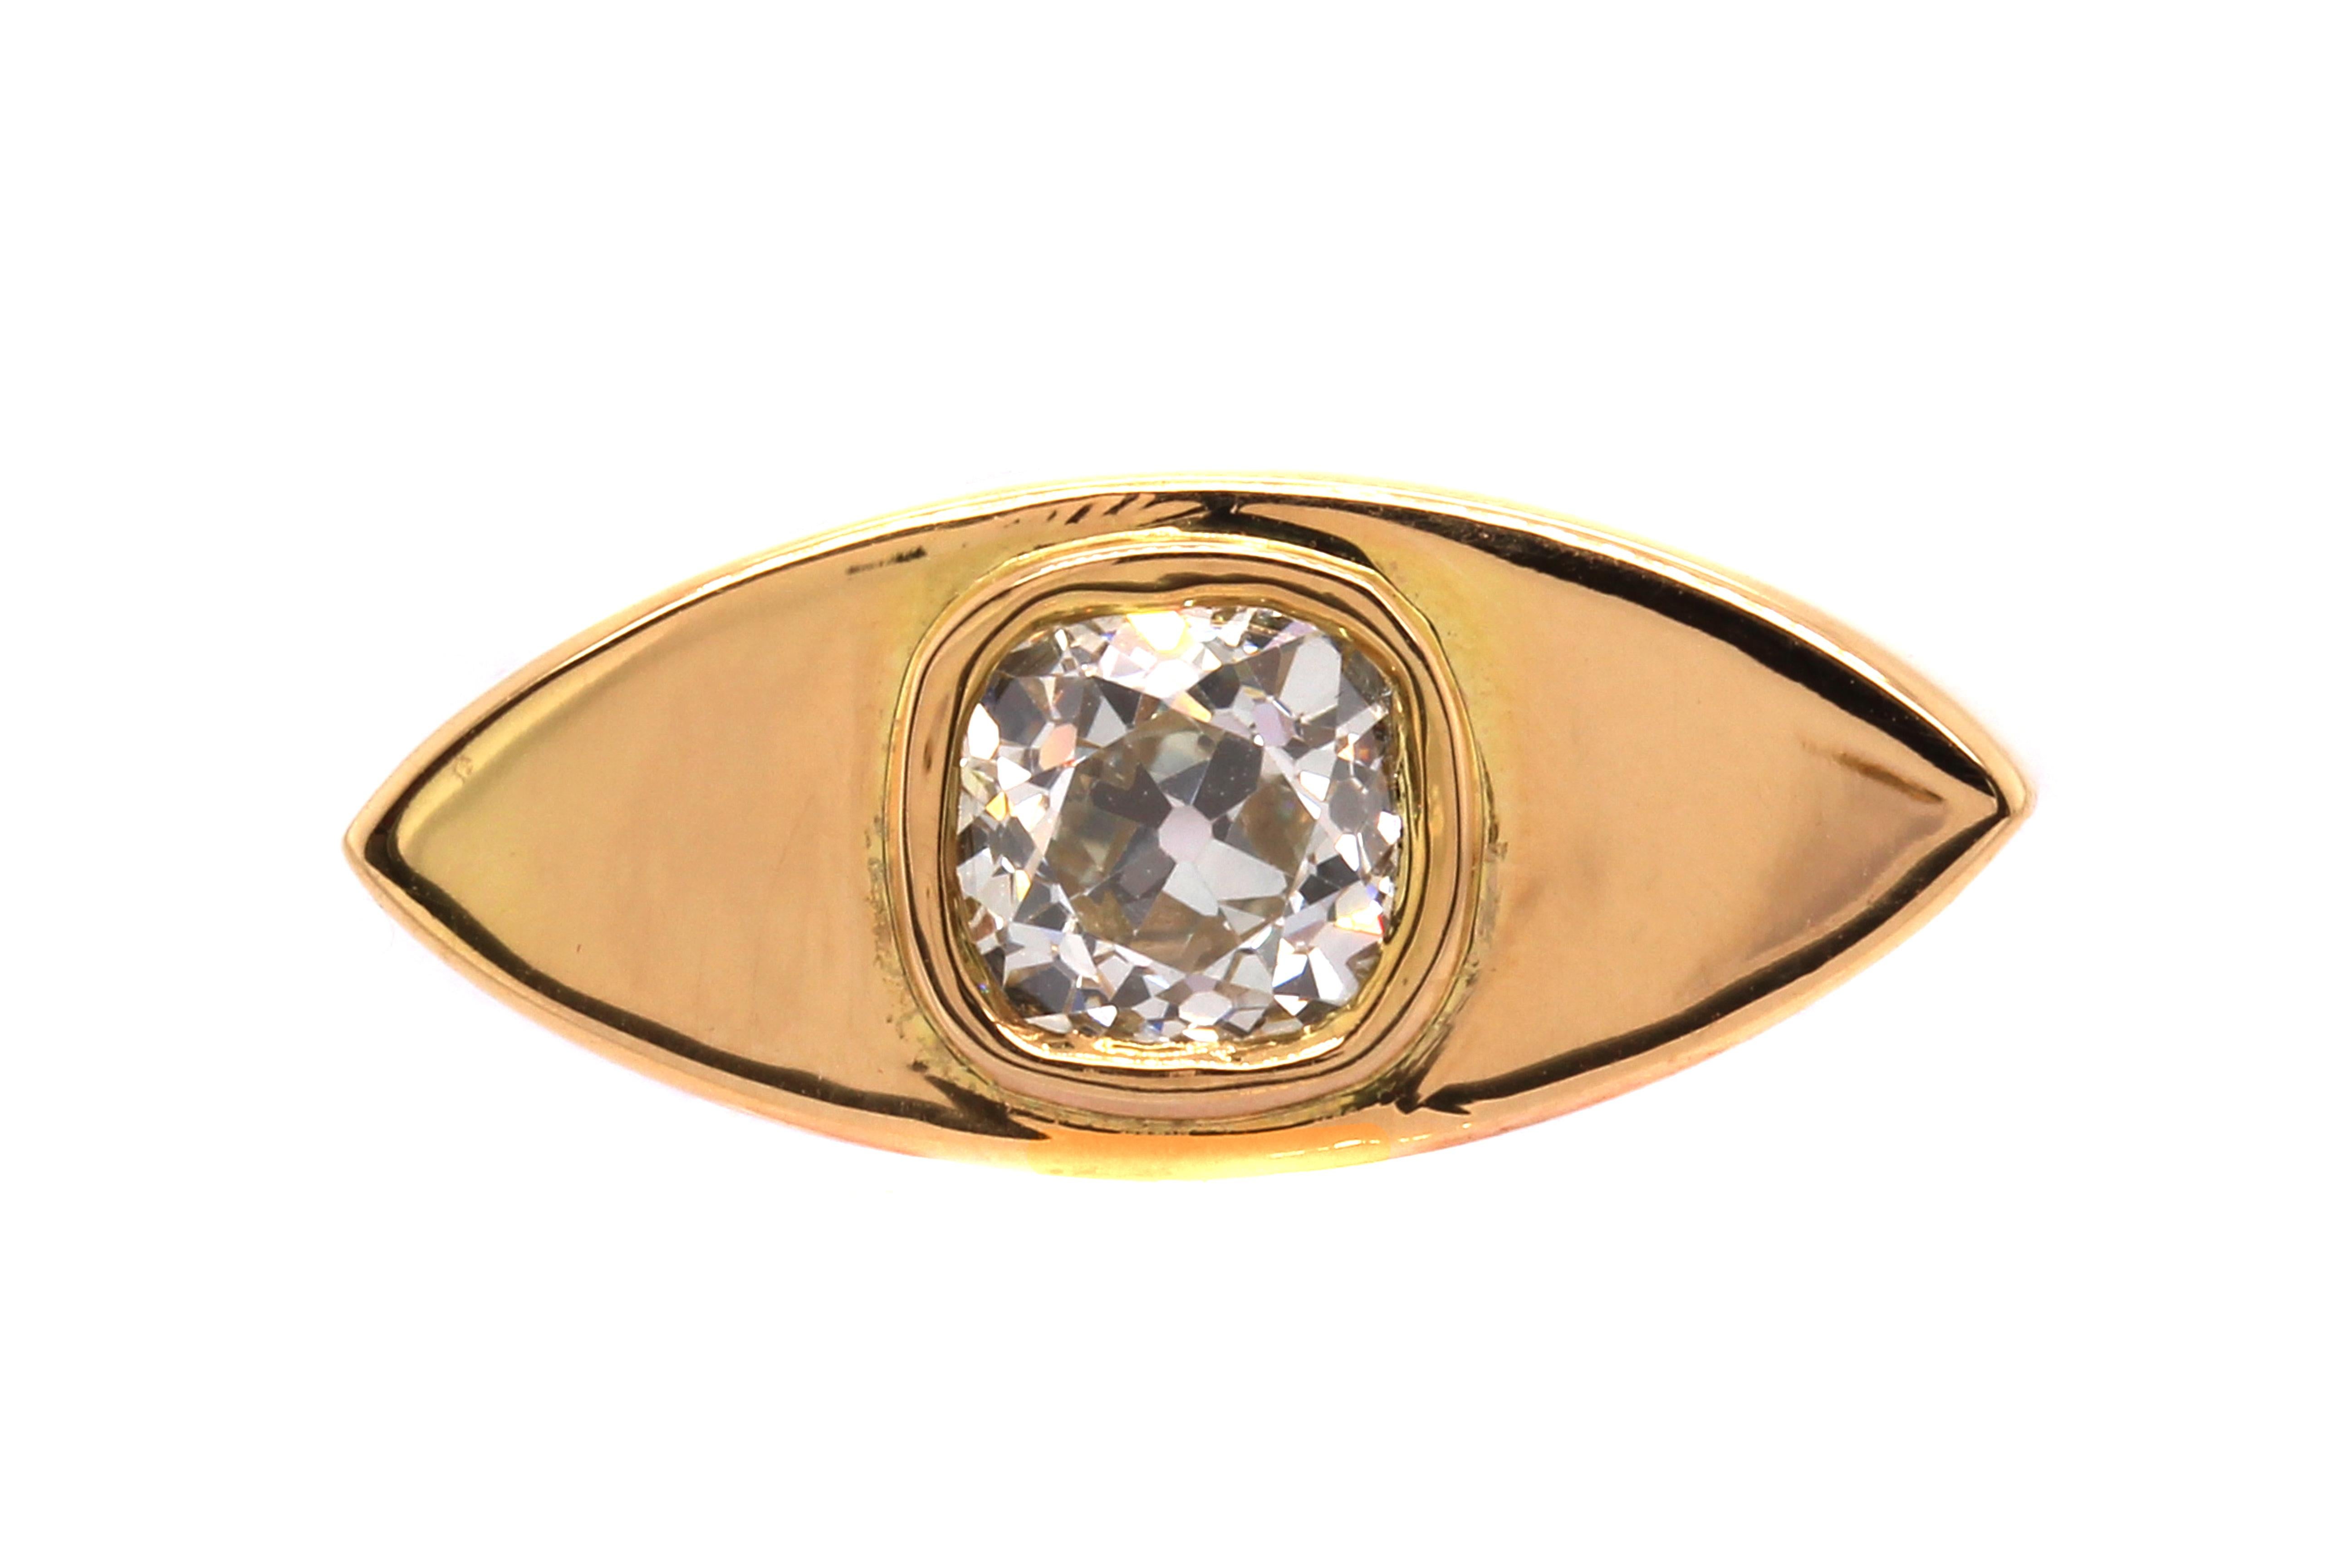 A charming old mine cut diamond circa 1880 is bezel set into the Castellani® Cleopatra ring using our 18kt Terra-Cotta Red™ Gold with a bright polish.
The design is wide on the finger. The bezel sits up slightly higher that the flat gold sides that